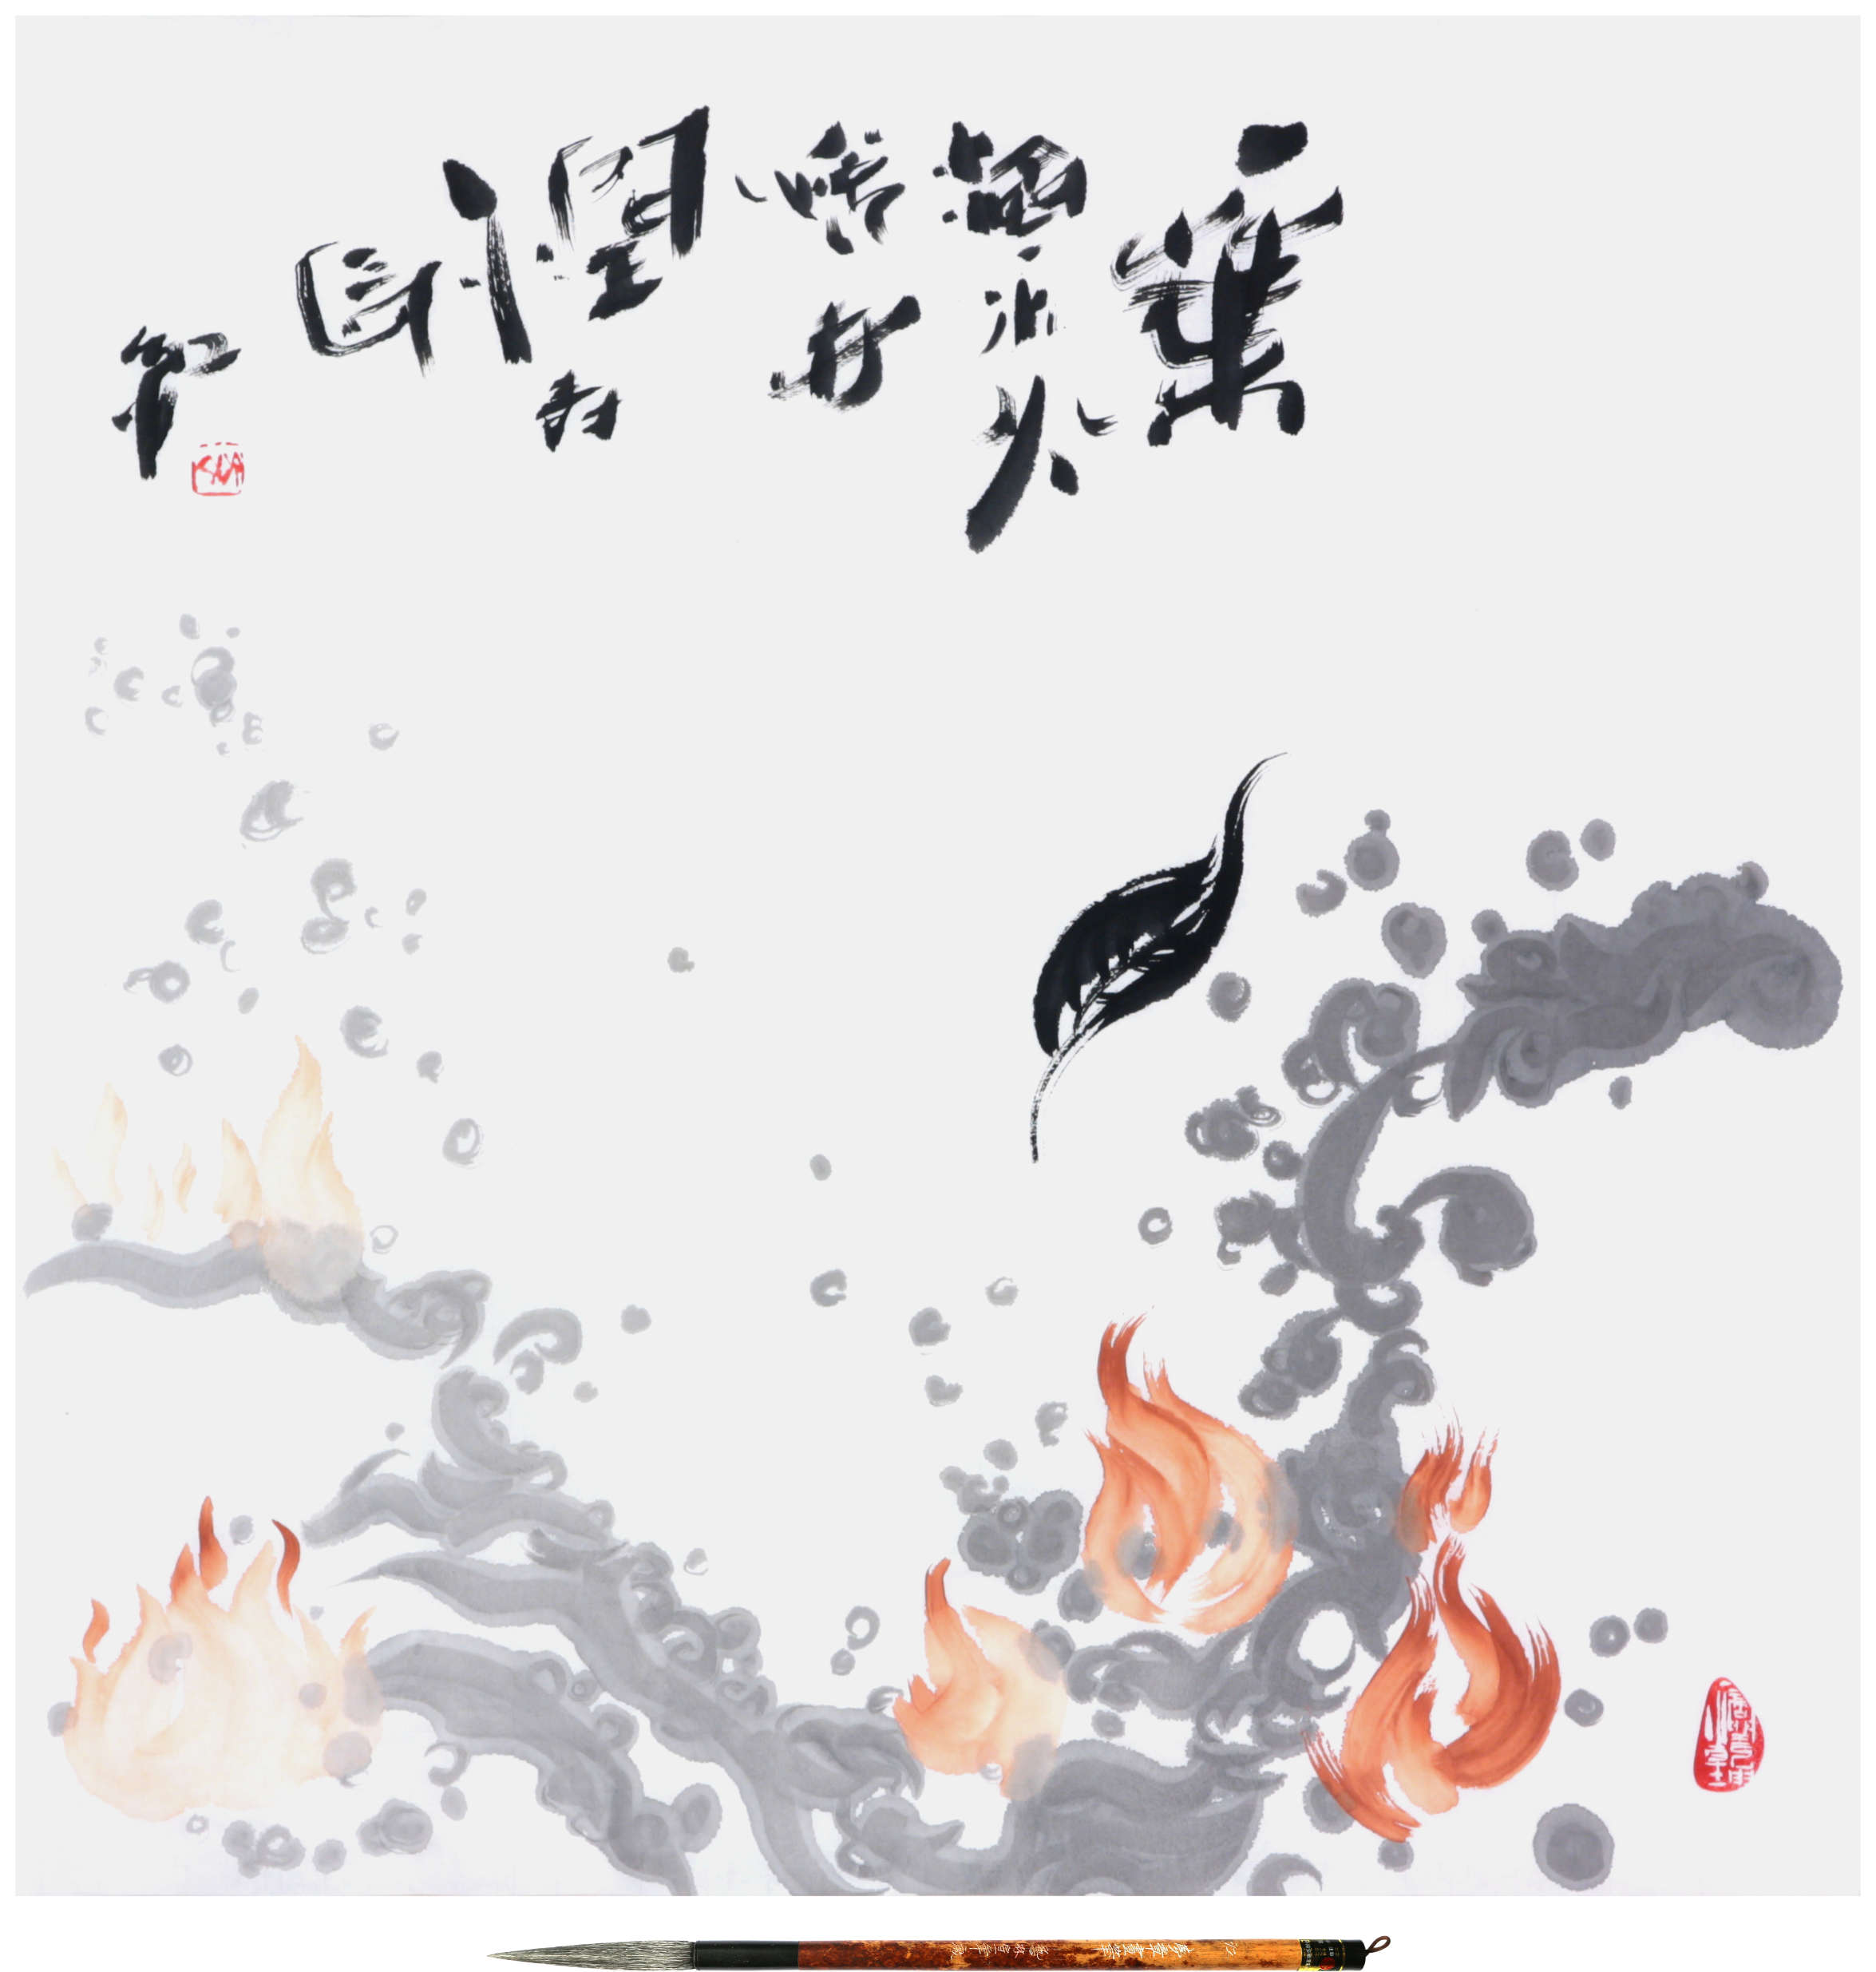 The Example of Sai Koh (Qi Hong)’s Freehand Brushwork Traditional Chinese Painting and Calligraphy on Tea: Chinese painting (imaginary painting, literati painting, ink wash painting), Chinese calligraphy (semi-seal script calligraphy), Chinese seal engraving (Chinese seal carving, Chinese seal cutting) - A Tea Leaf - ink & color on Xuan paper, 2018 - Inscriptions: A leaf harmonizes water and fire； Delighted emotions help prolong life. Koh (Hong); Chinese, 一葉濟水火 悅志潤壽長 紅 - Seal: Sai (Qi); Chinese, 齊 A Drop of Water Moistens the Universe; Chinese, 一滴潤乾坤 - Xuan Paper: Mian Liao Mian Lian, 69×68cm - Brush: Goat Hair Long Head Brush, Meng Zhang Hua Bi · Jiang